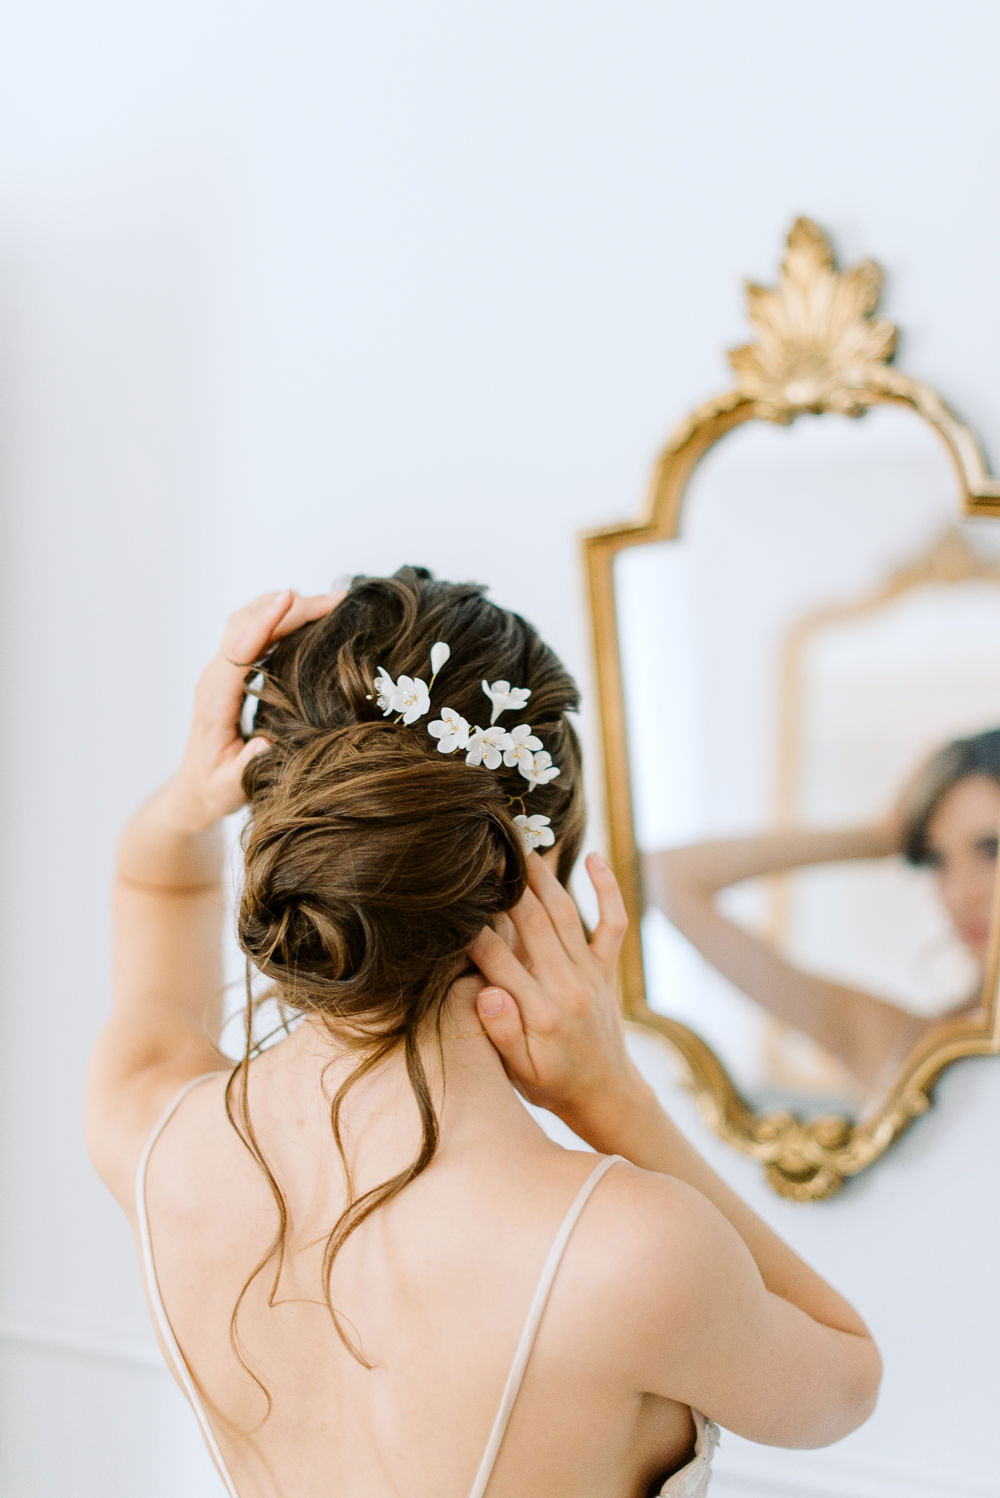 10 Gorgeous Bridal Hairstyles for a Charismatic Look – OYO Hotels: Travel  Blog